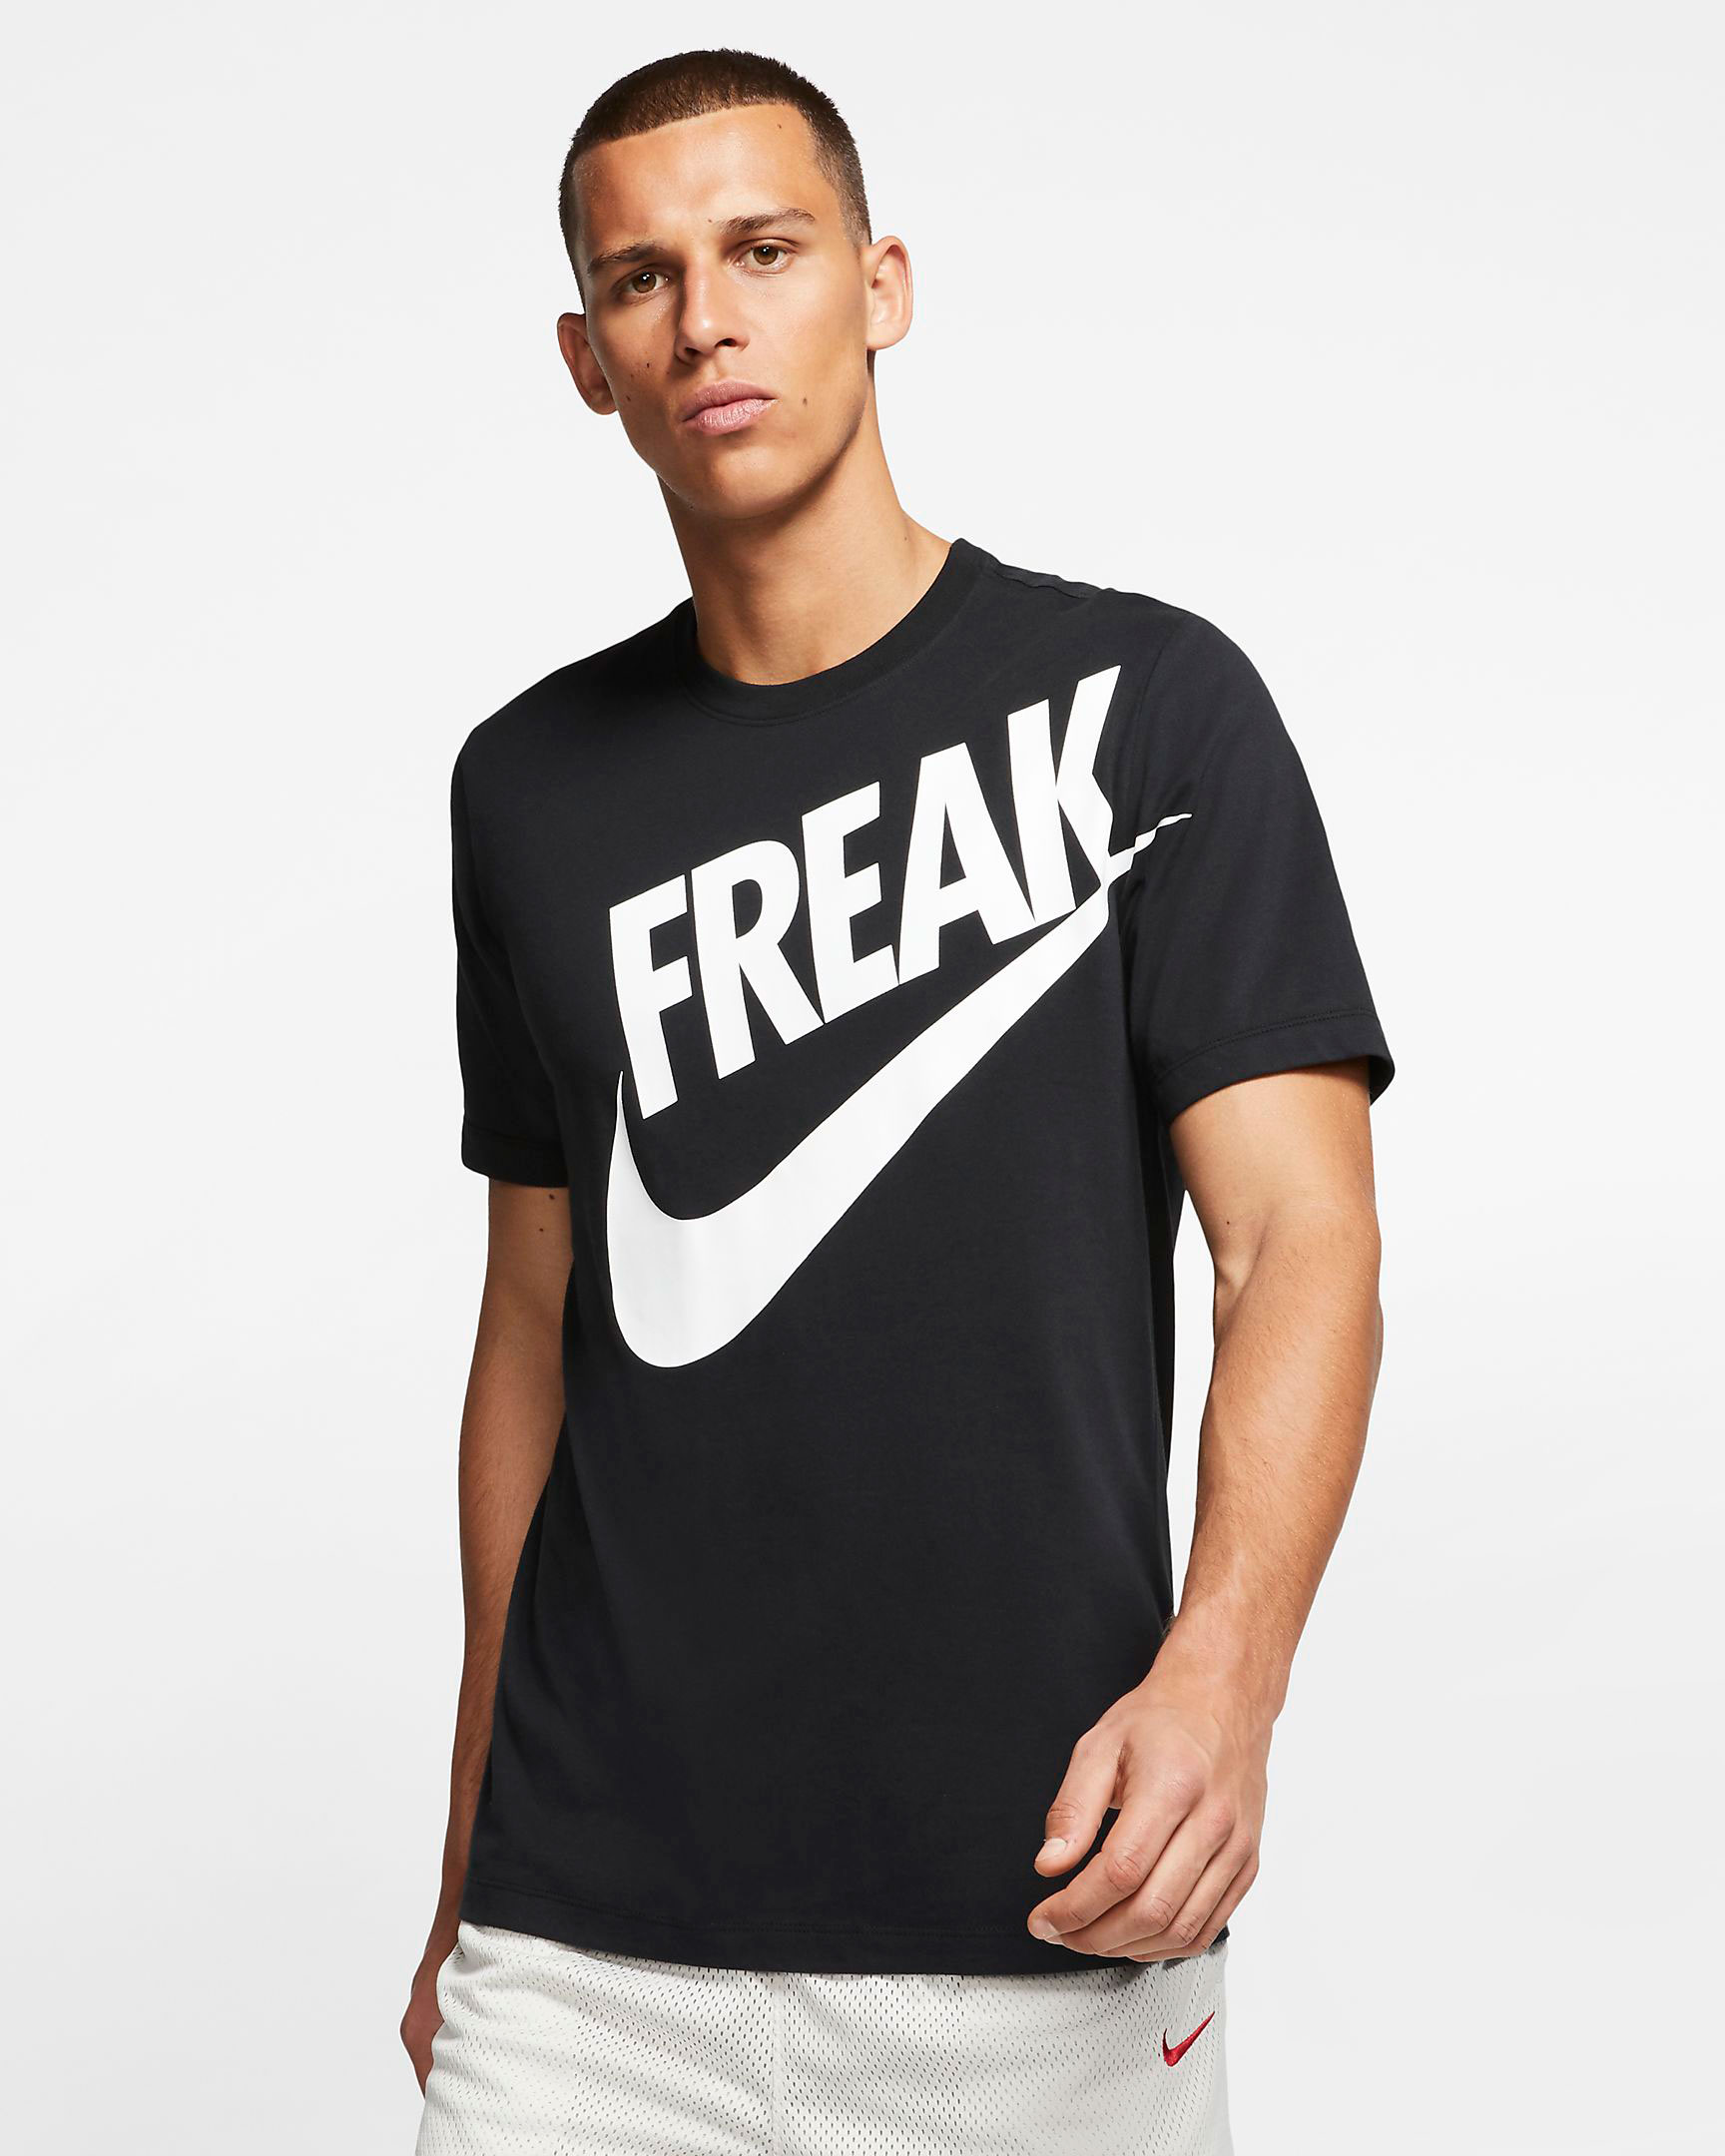 Nike Zoom Freak 1 Black White Giannis Clothing Collection | SneakerFits.com